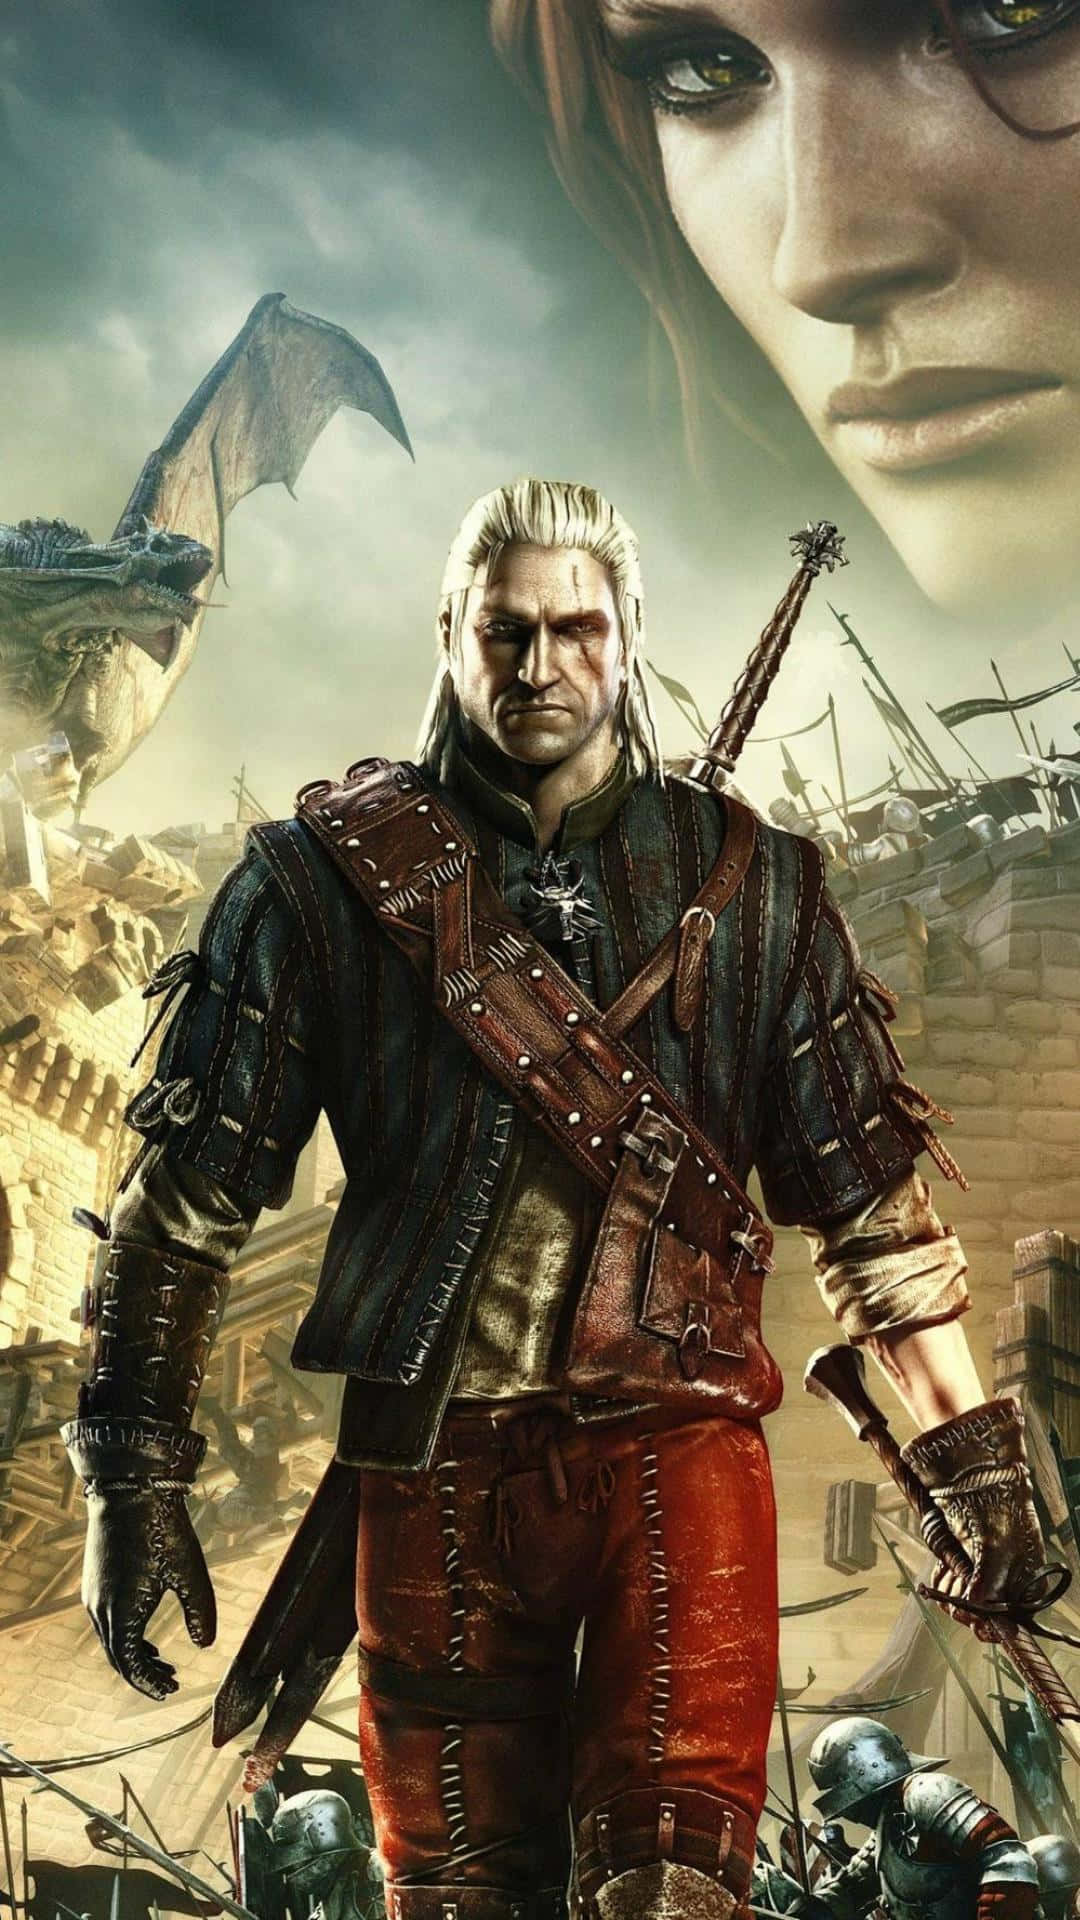 Enhance your gaming experience with the Witcher 3 Phone Wallpaper